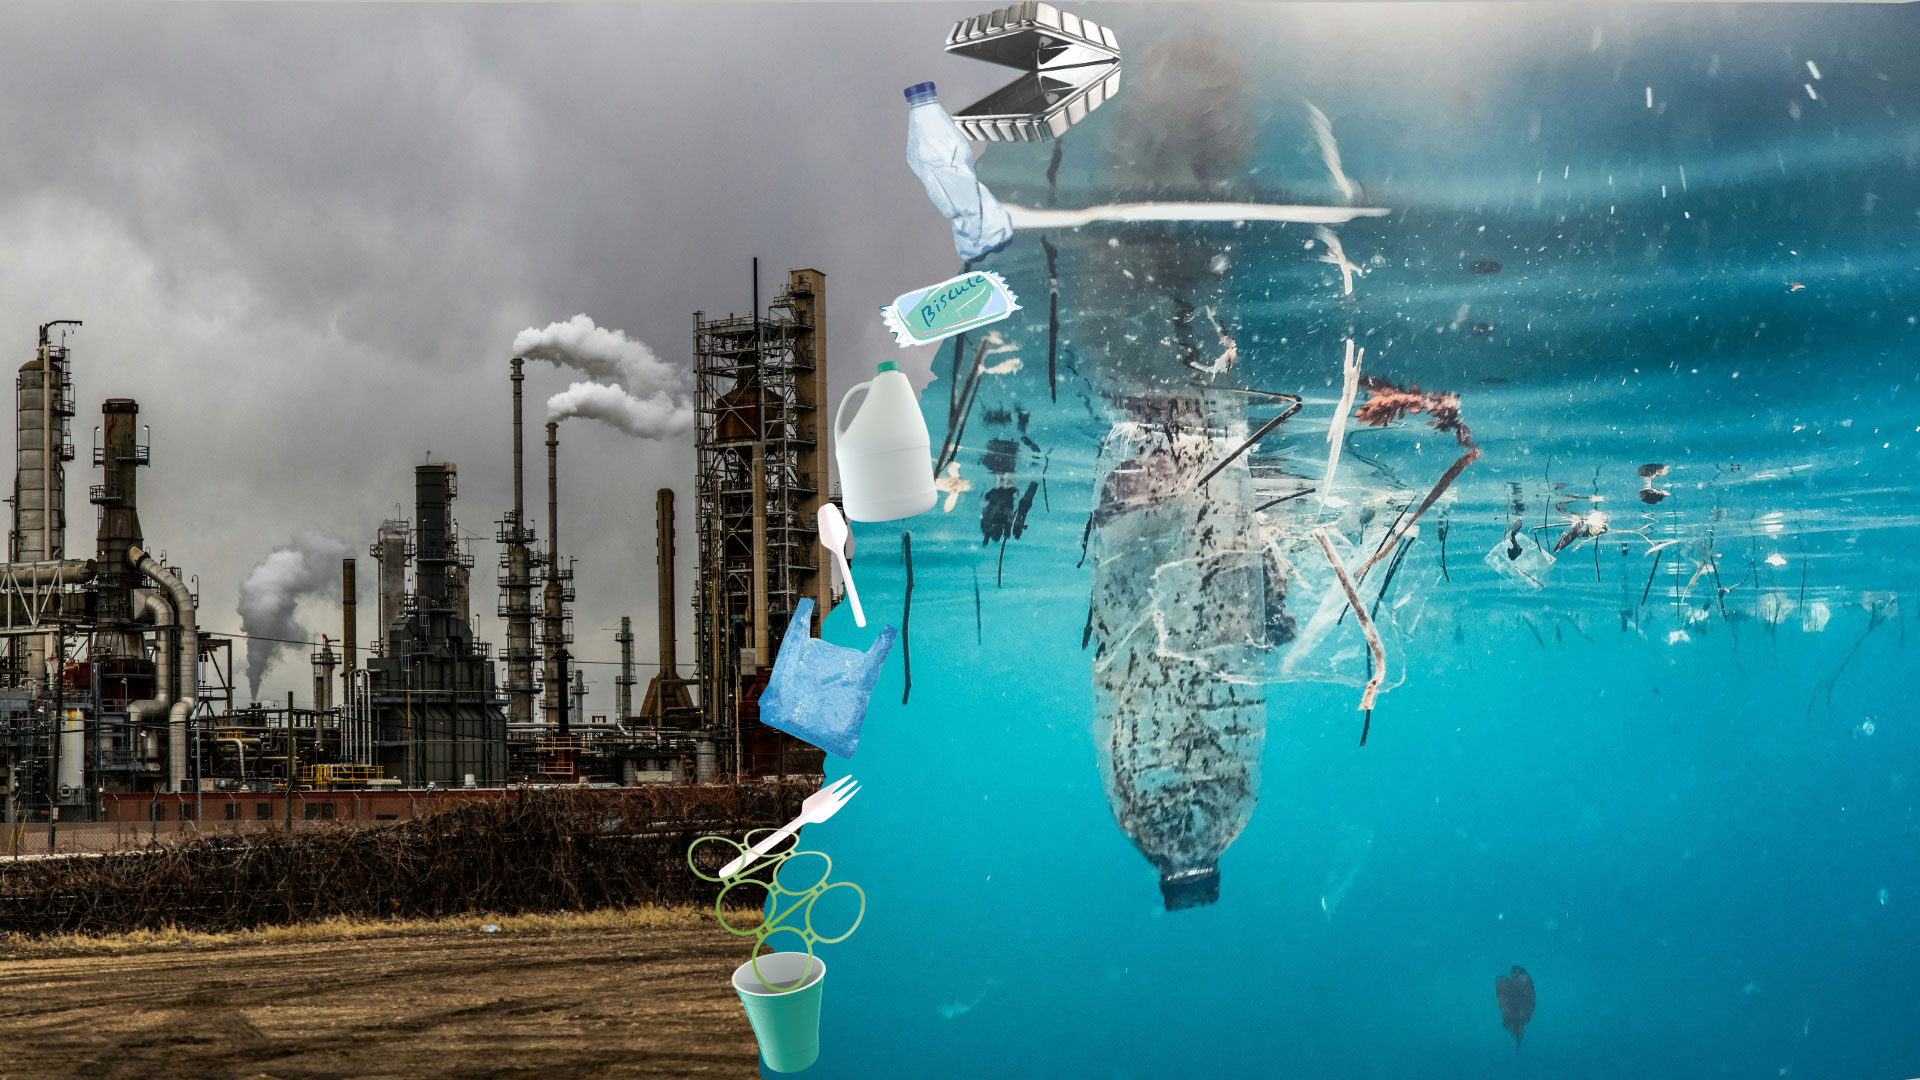 Plastic factory with emissions and plastics in the sea. Image collage.